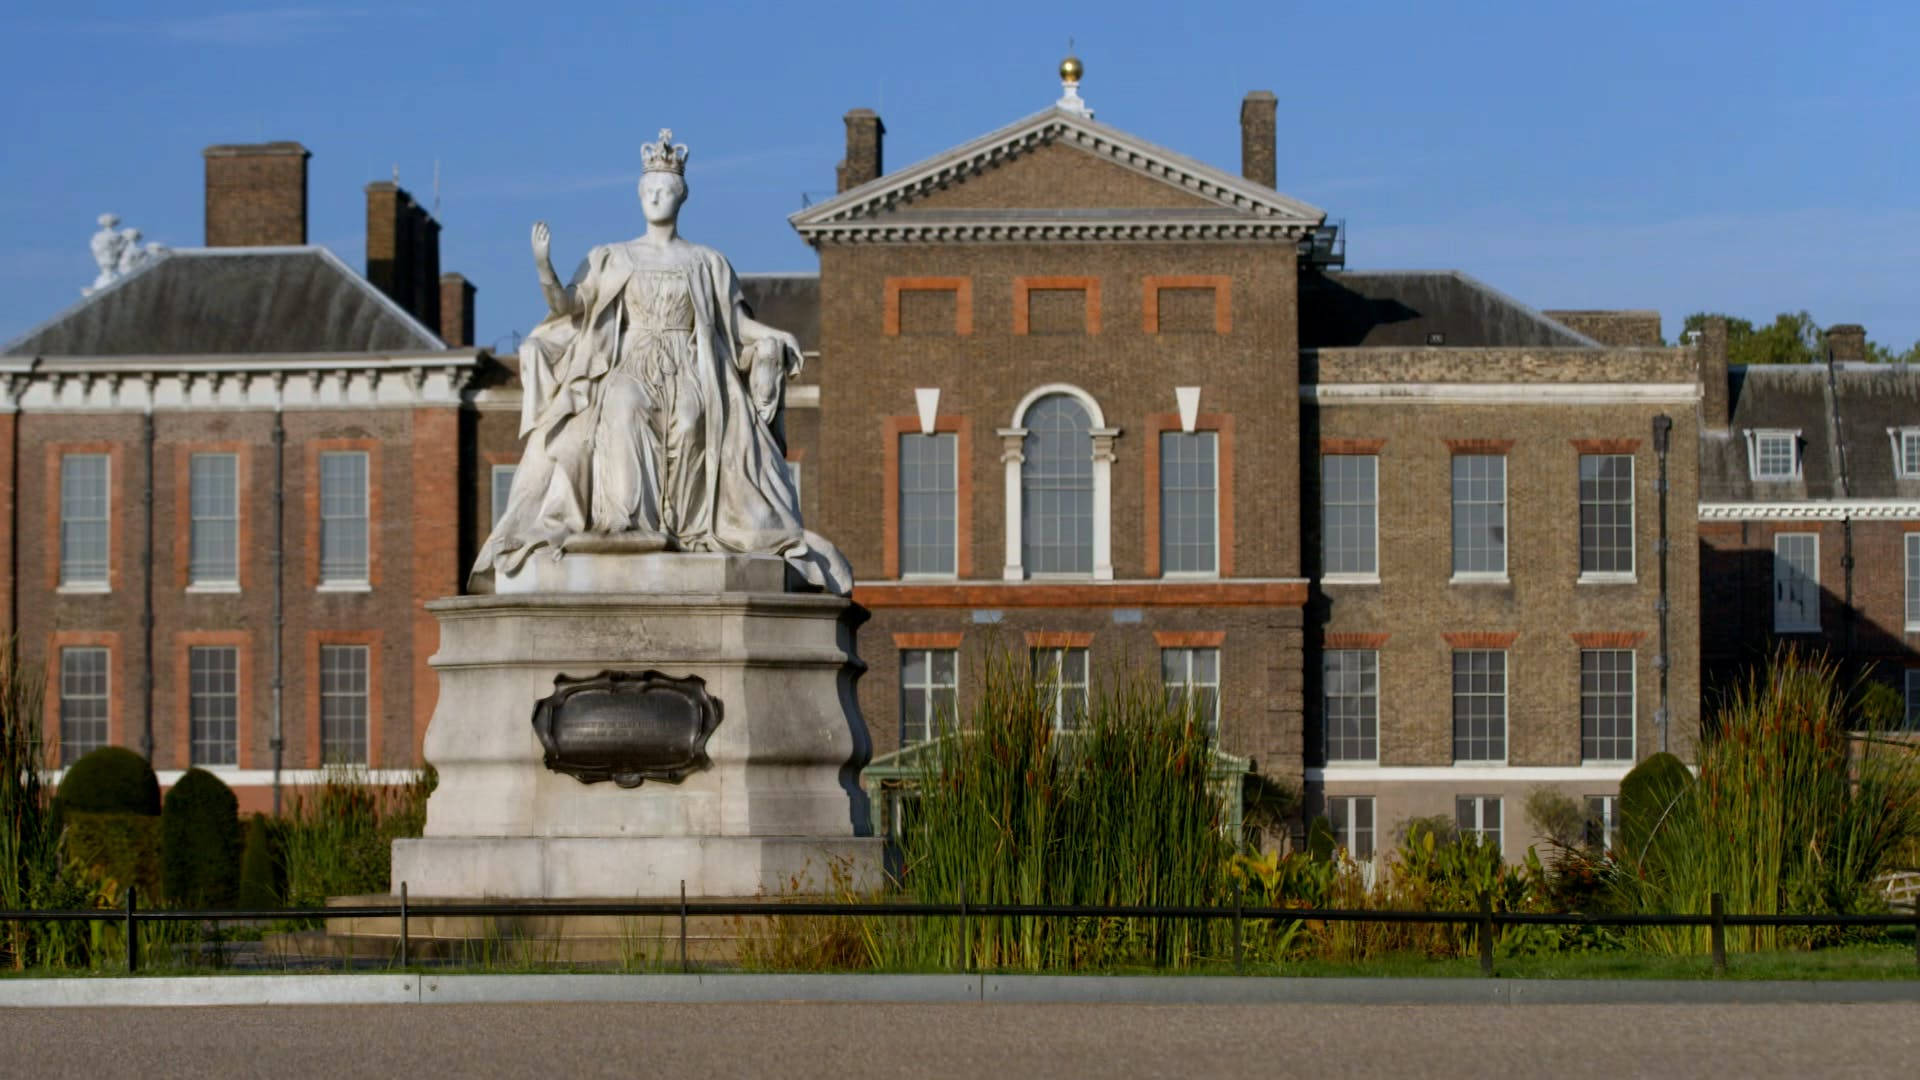 Kensington Palace And Statue In Front Picture